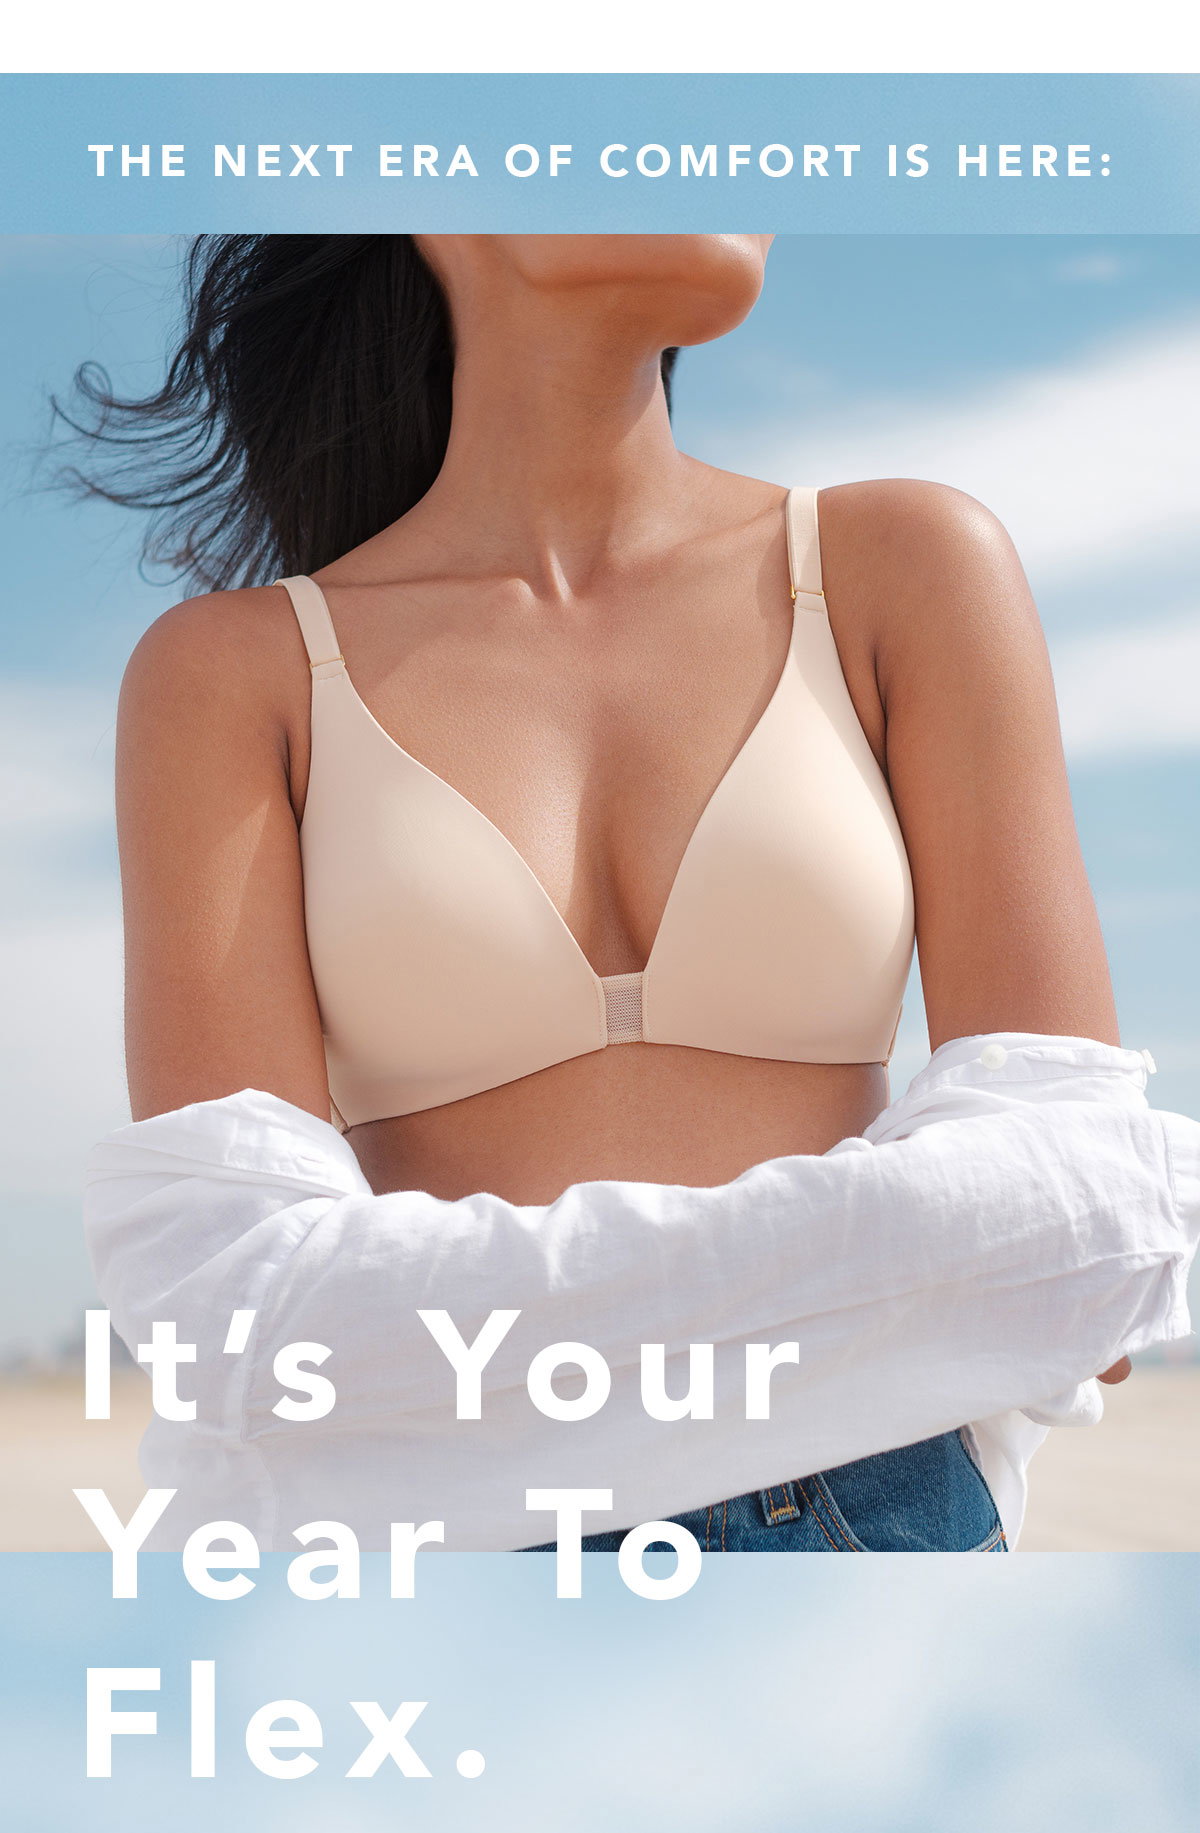 Lively: Introducing: The Flex No-Wire Bra